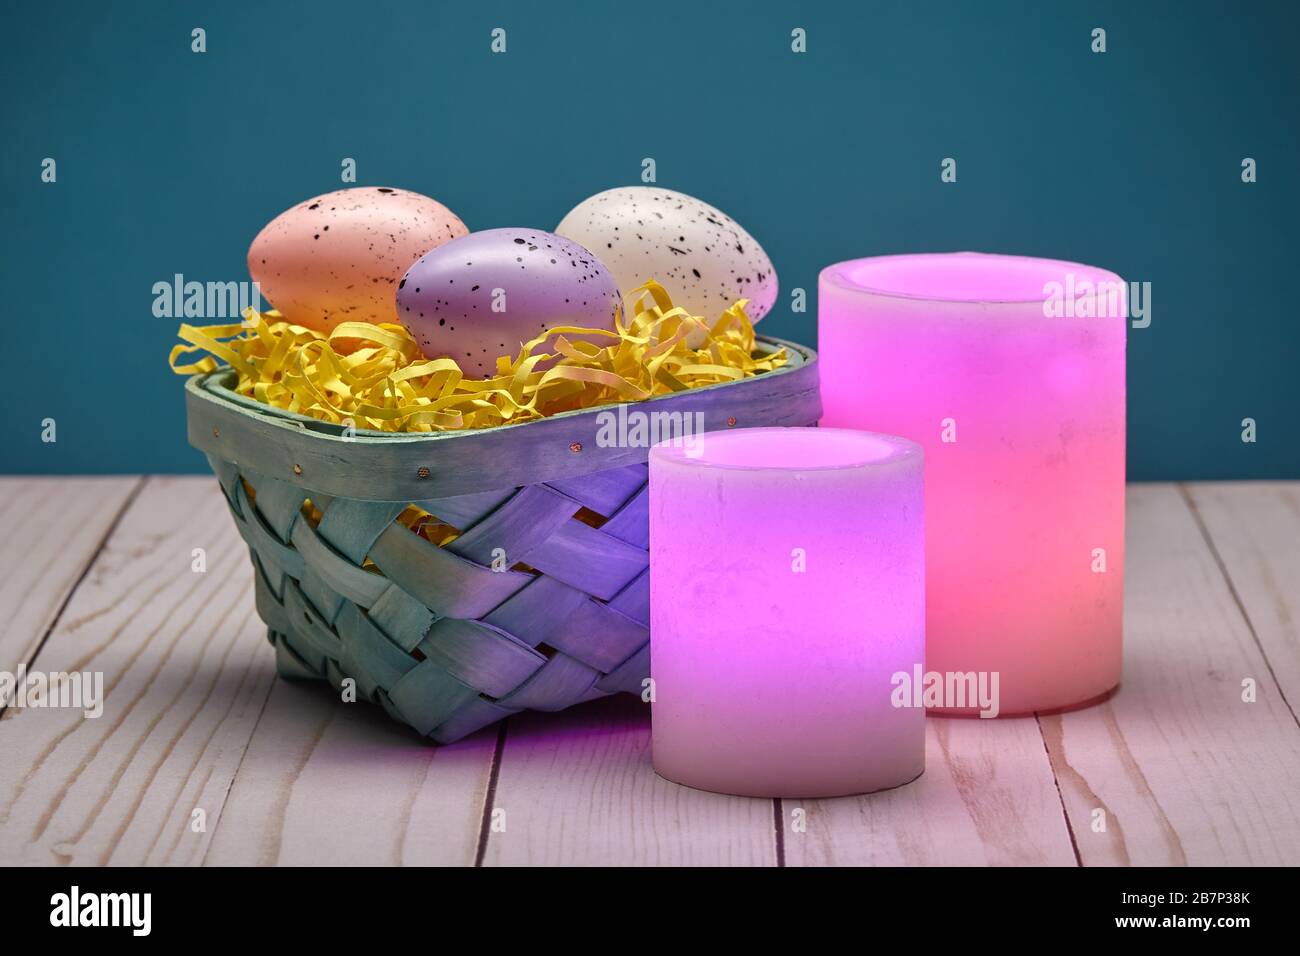 Two Glowing Pink Wax Candles and a Basket of Easter Eggs Stock Photo